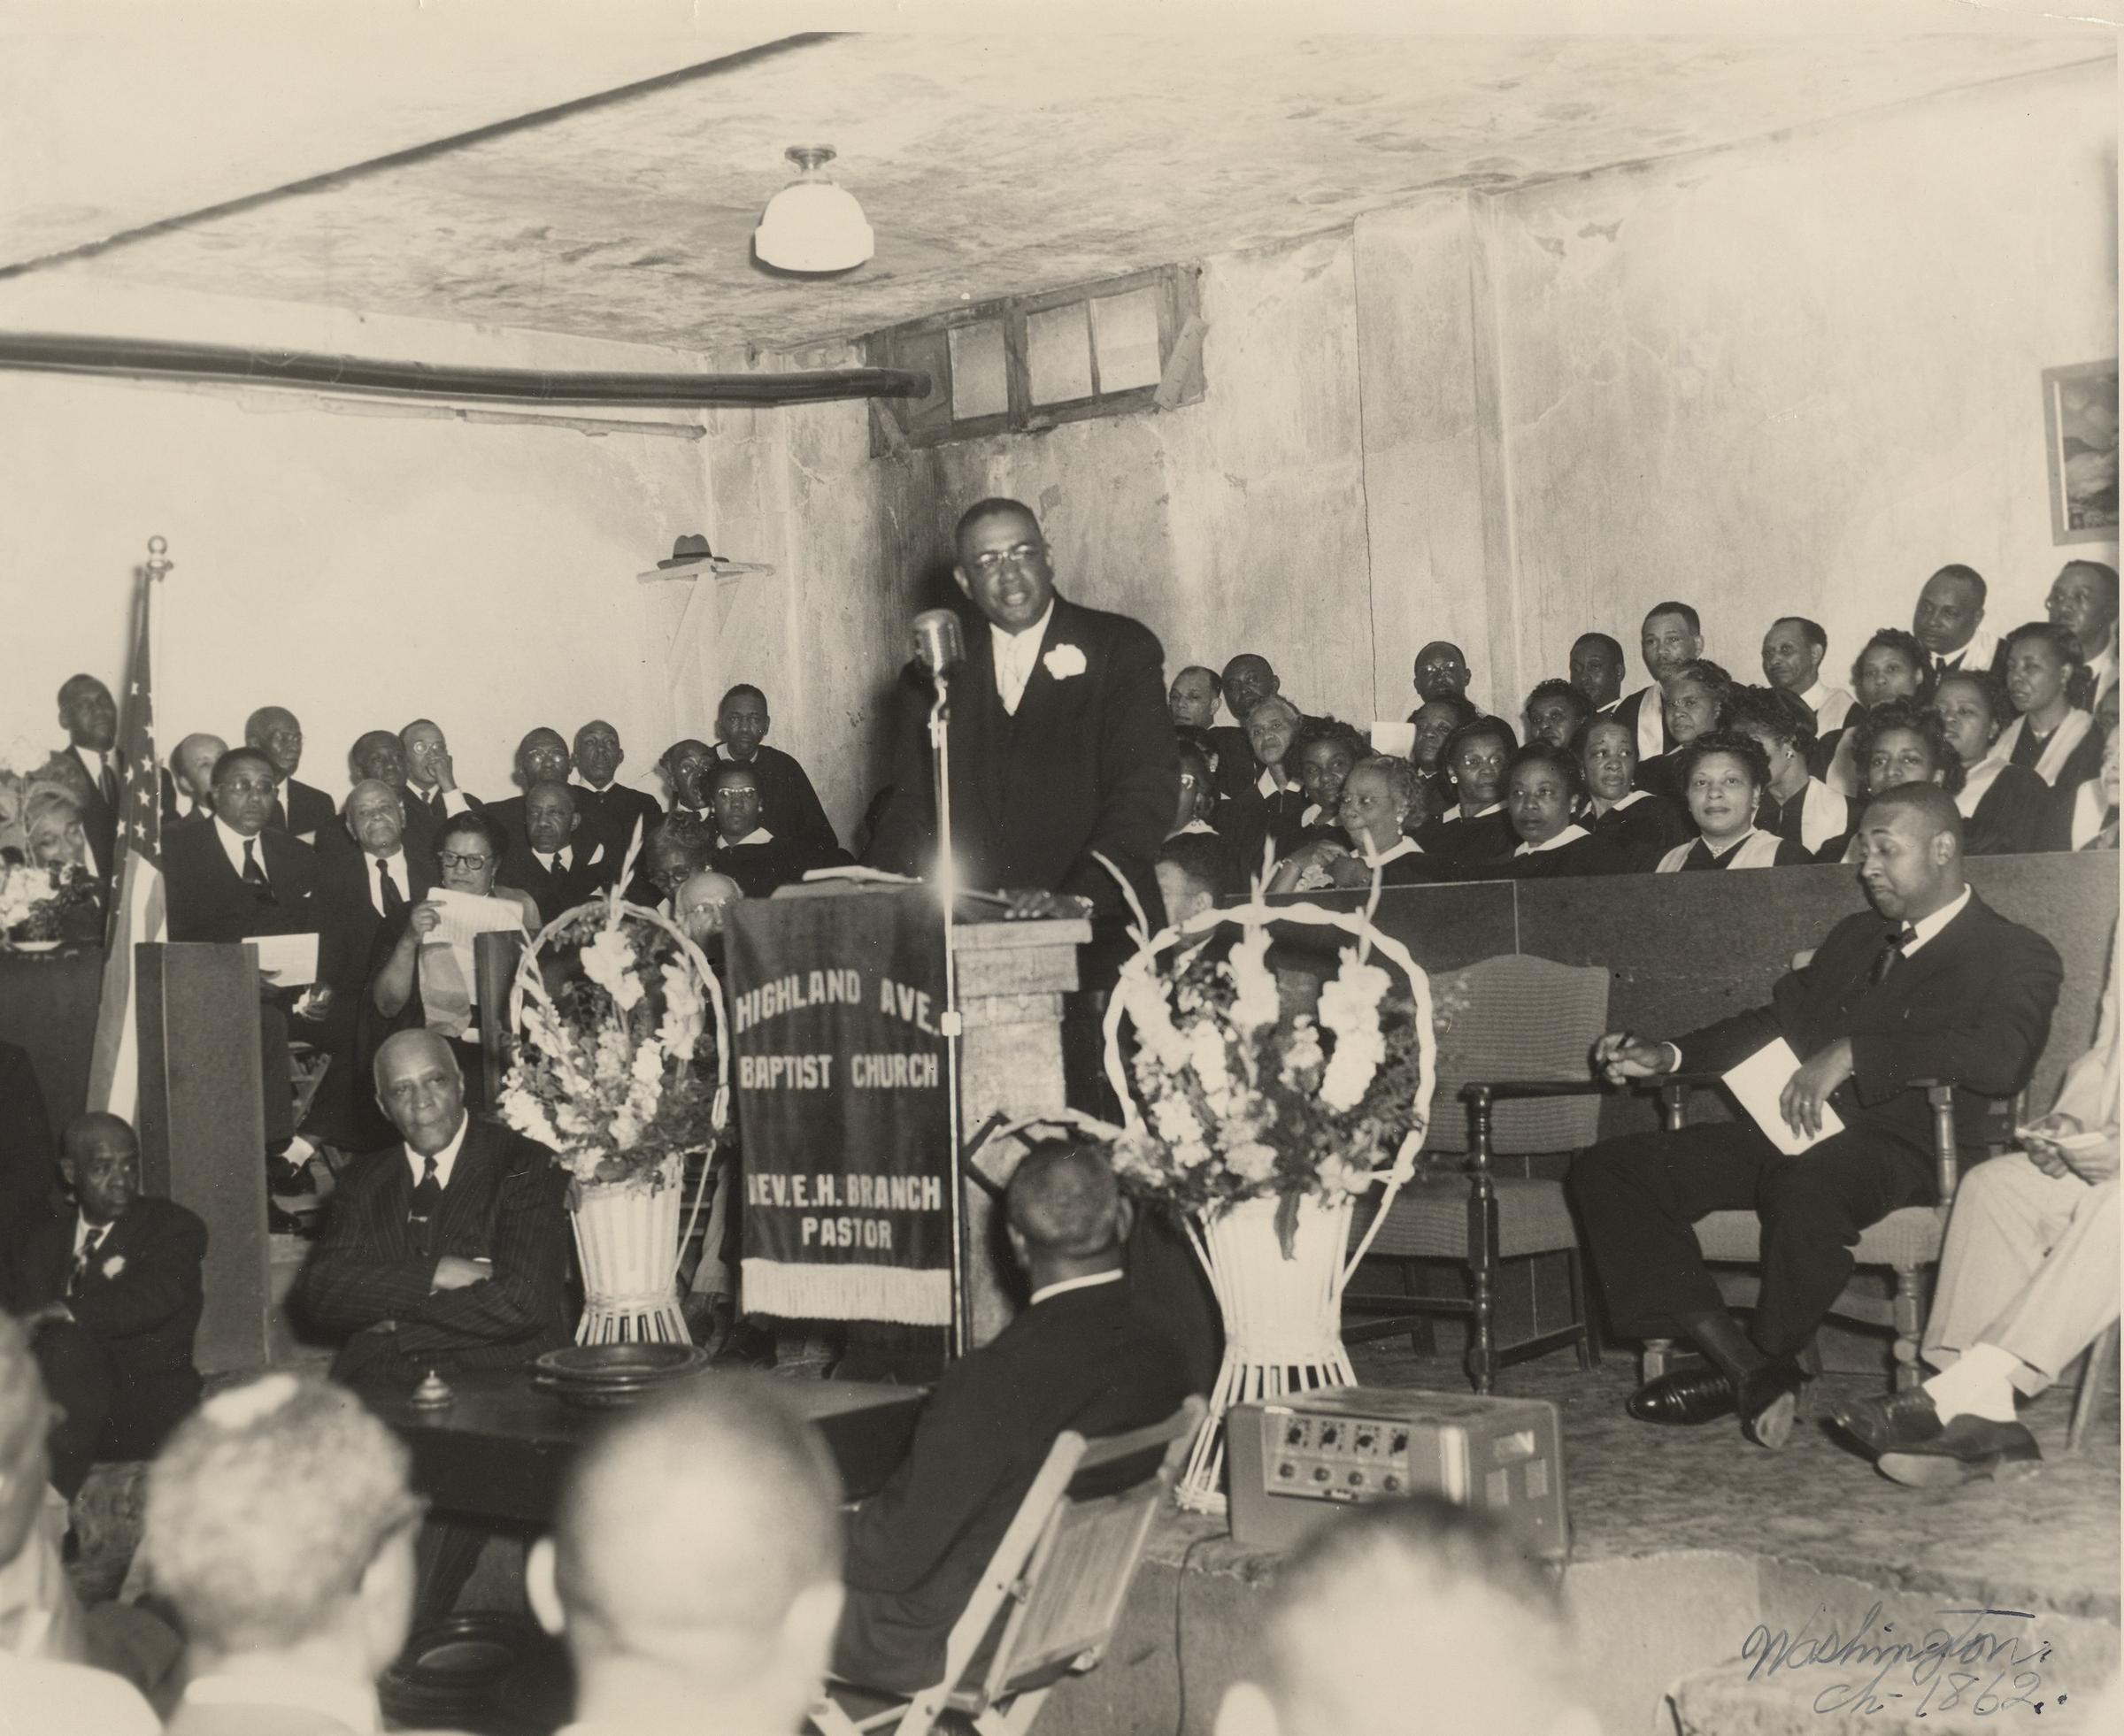 The Role Of Churches And Social Clubs In AfricanAmerican